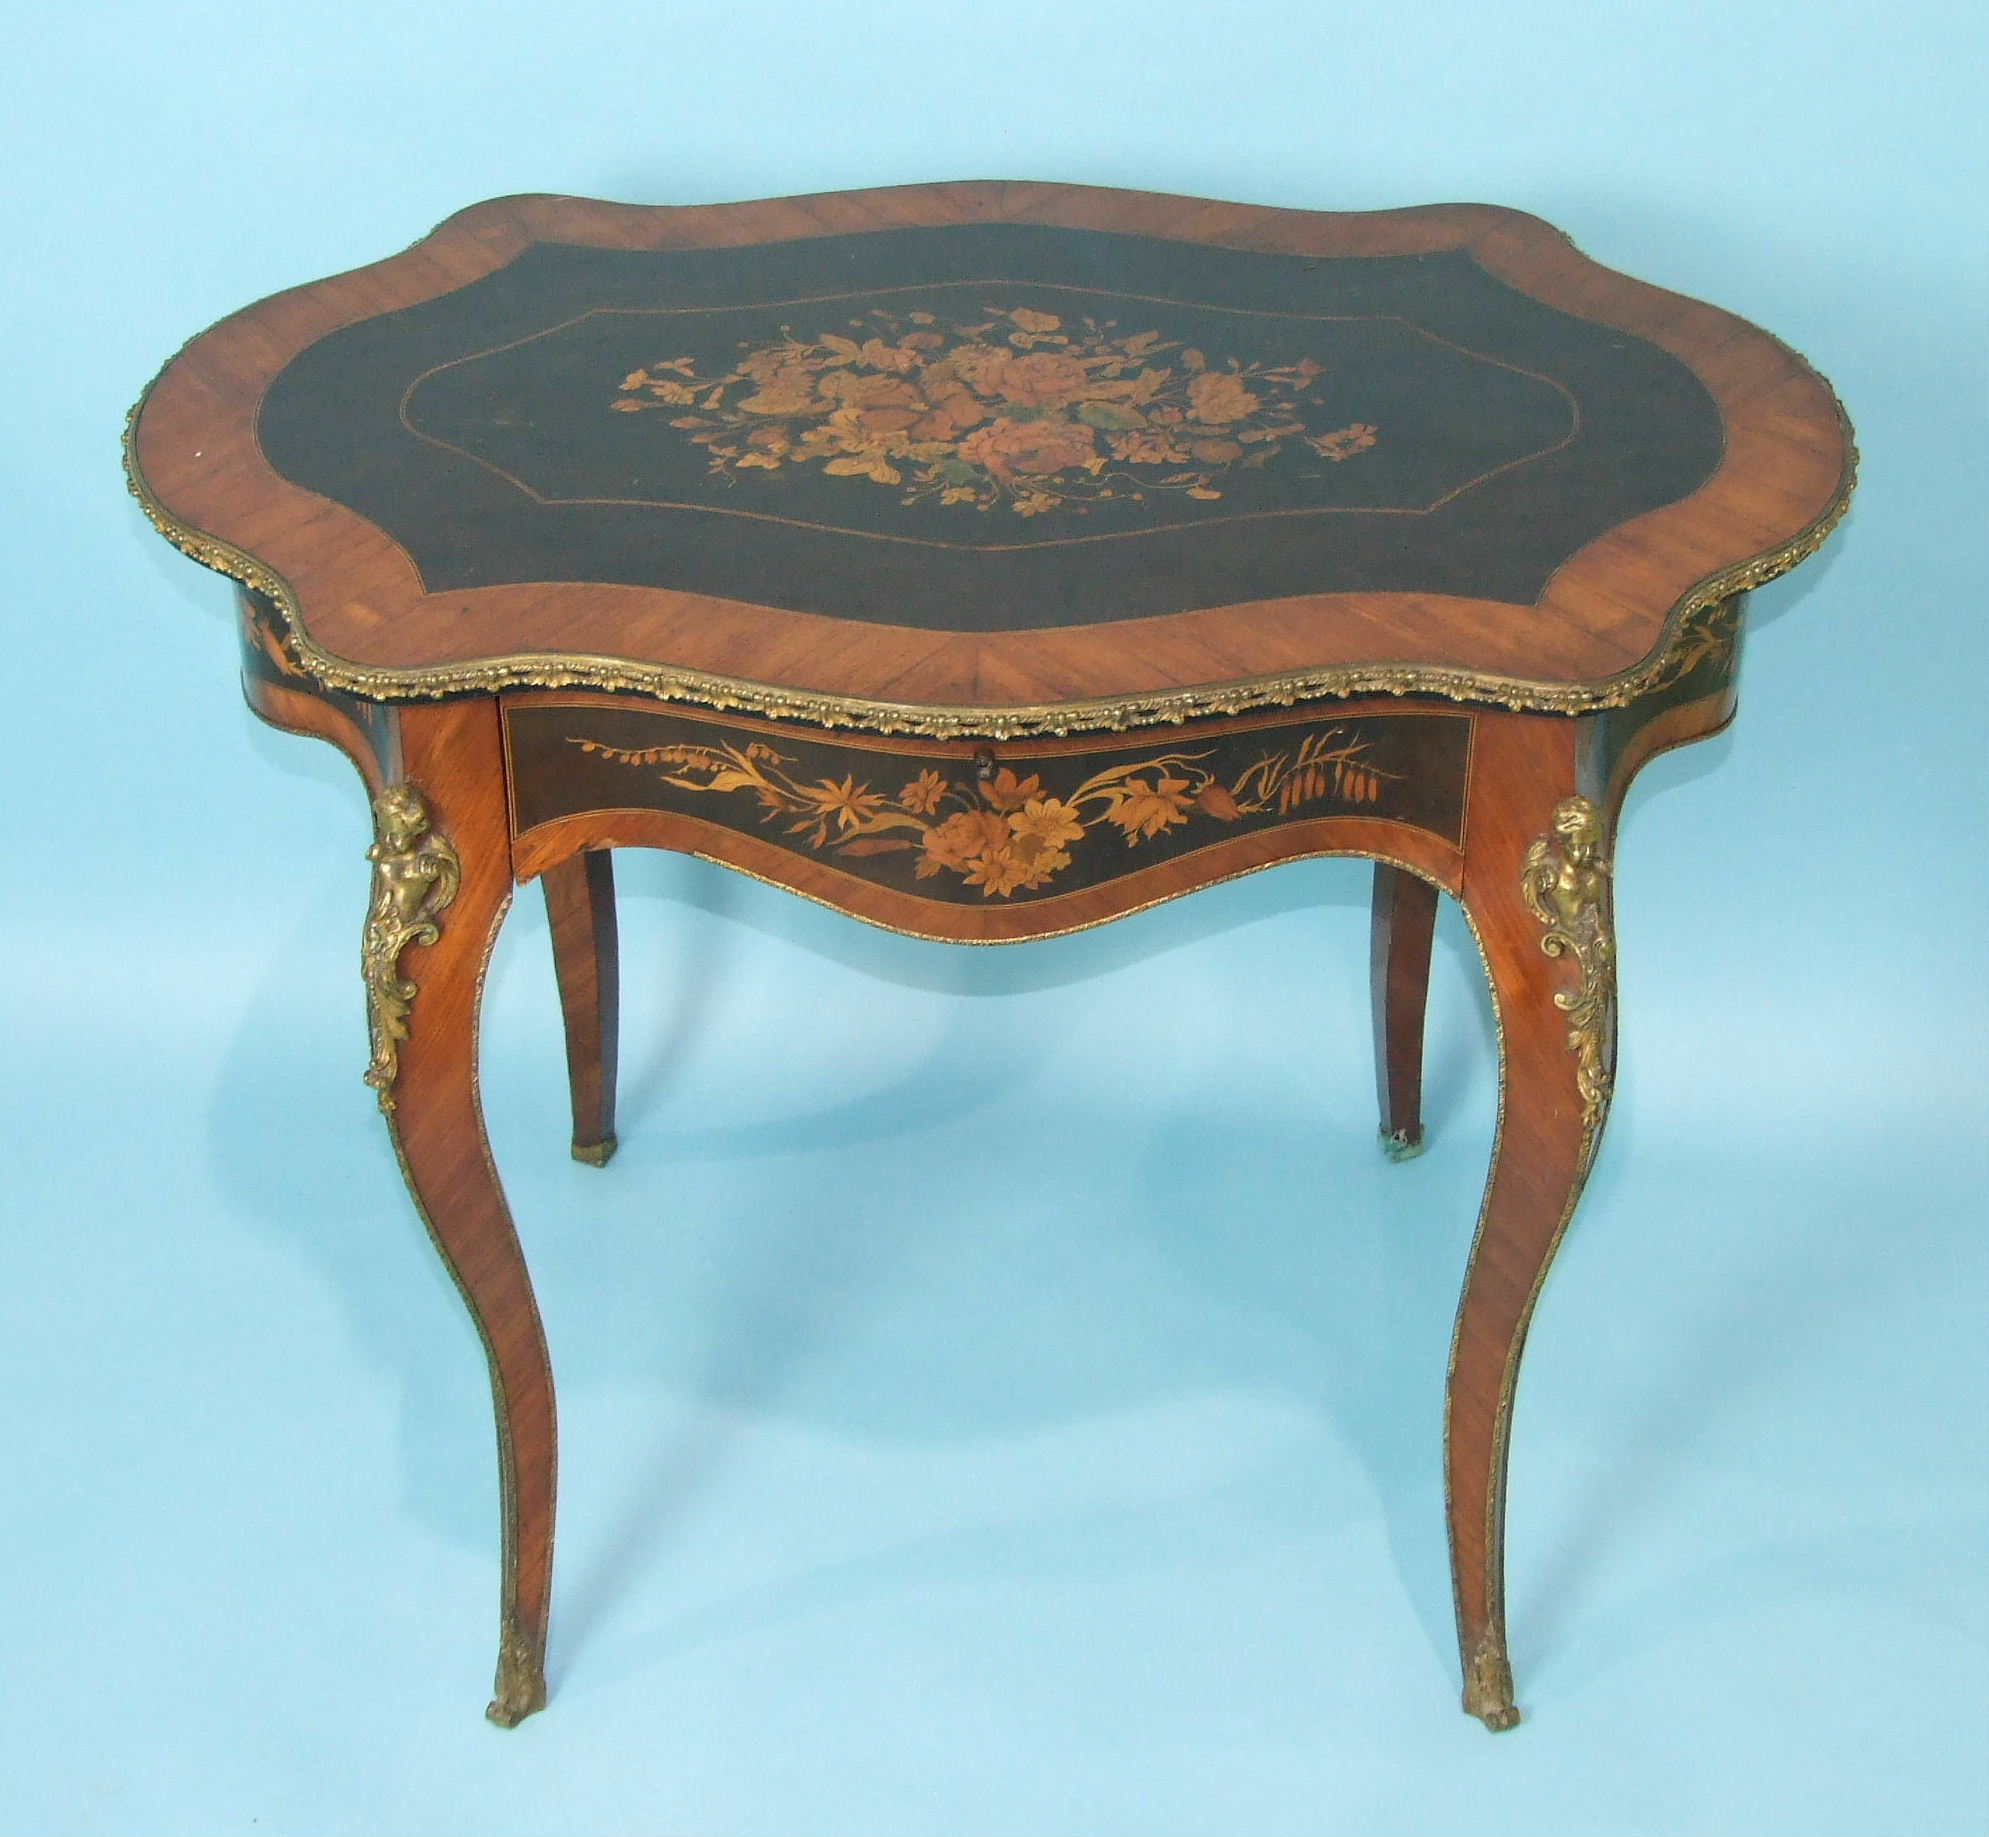 A good quality 19th century French kingwood and ebony marquetry centre table.